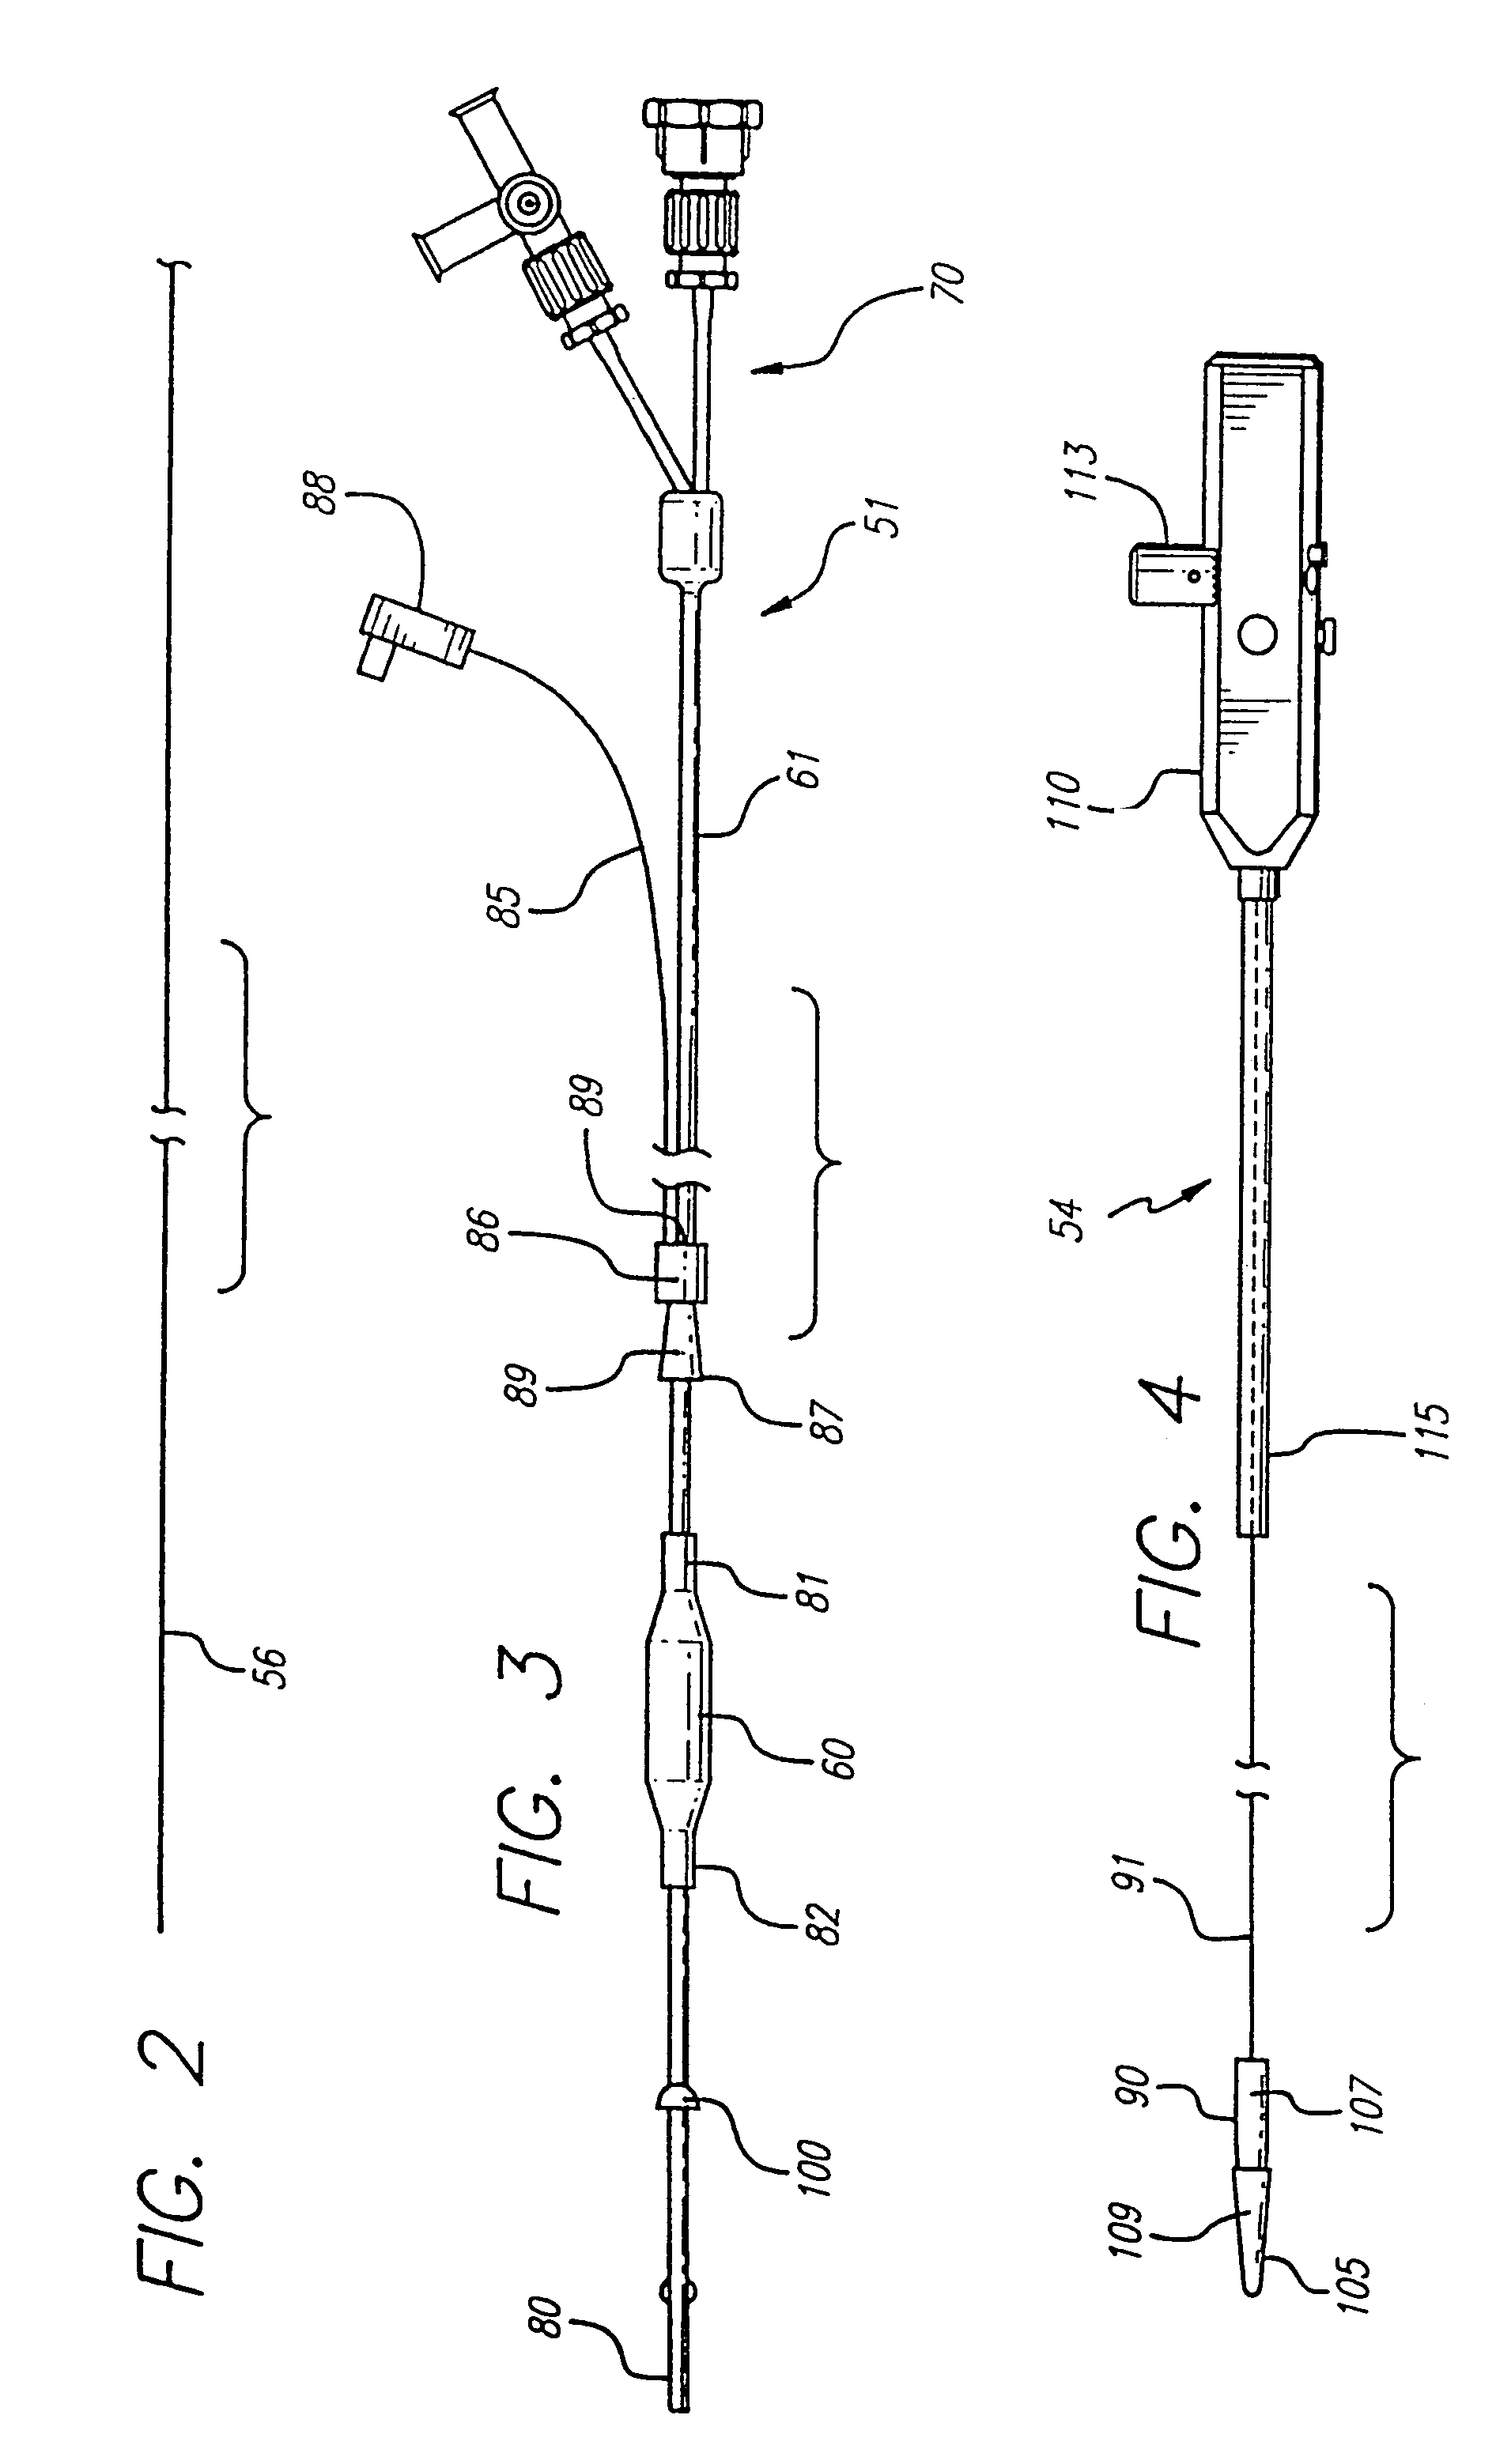 Bifurcated multicapsule intraluminal grafting system and method